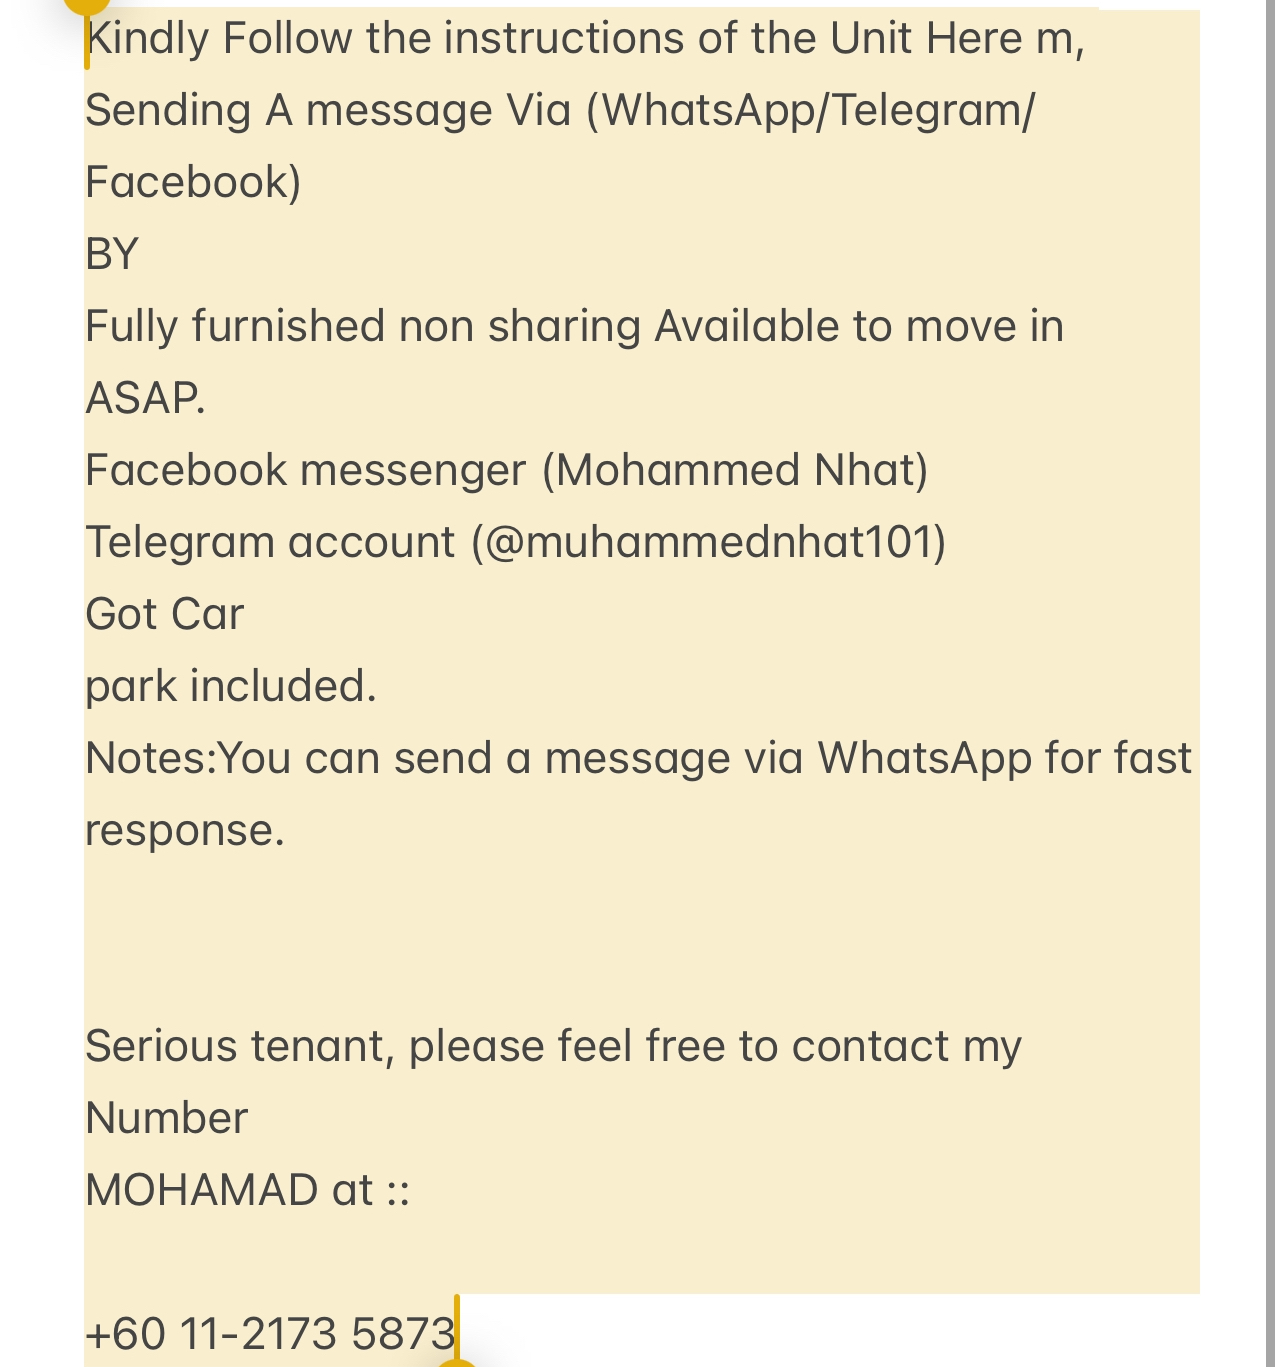 room for rent, studio, berjaya times square, Send the owner a message on WhatsApp/facebook if you want to RENT the unit facebook (Mohammed Nhat)&Telegram(@muhammednhat101) Fully furnished non sharing :(comfortable)